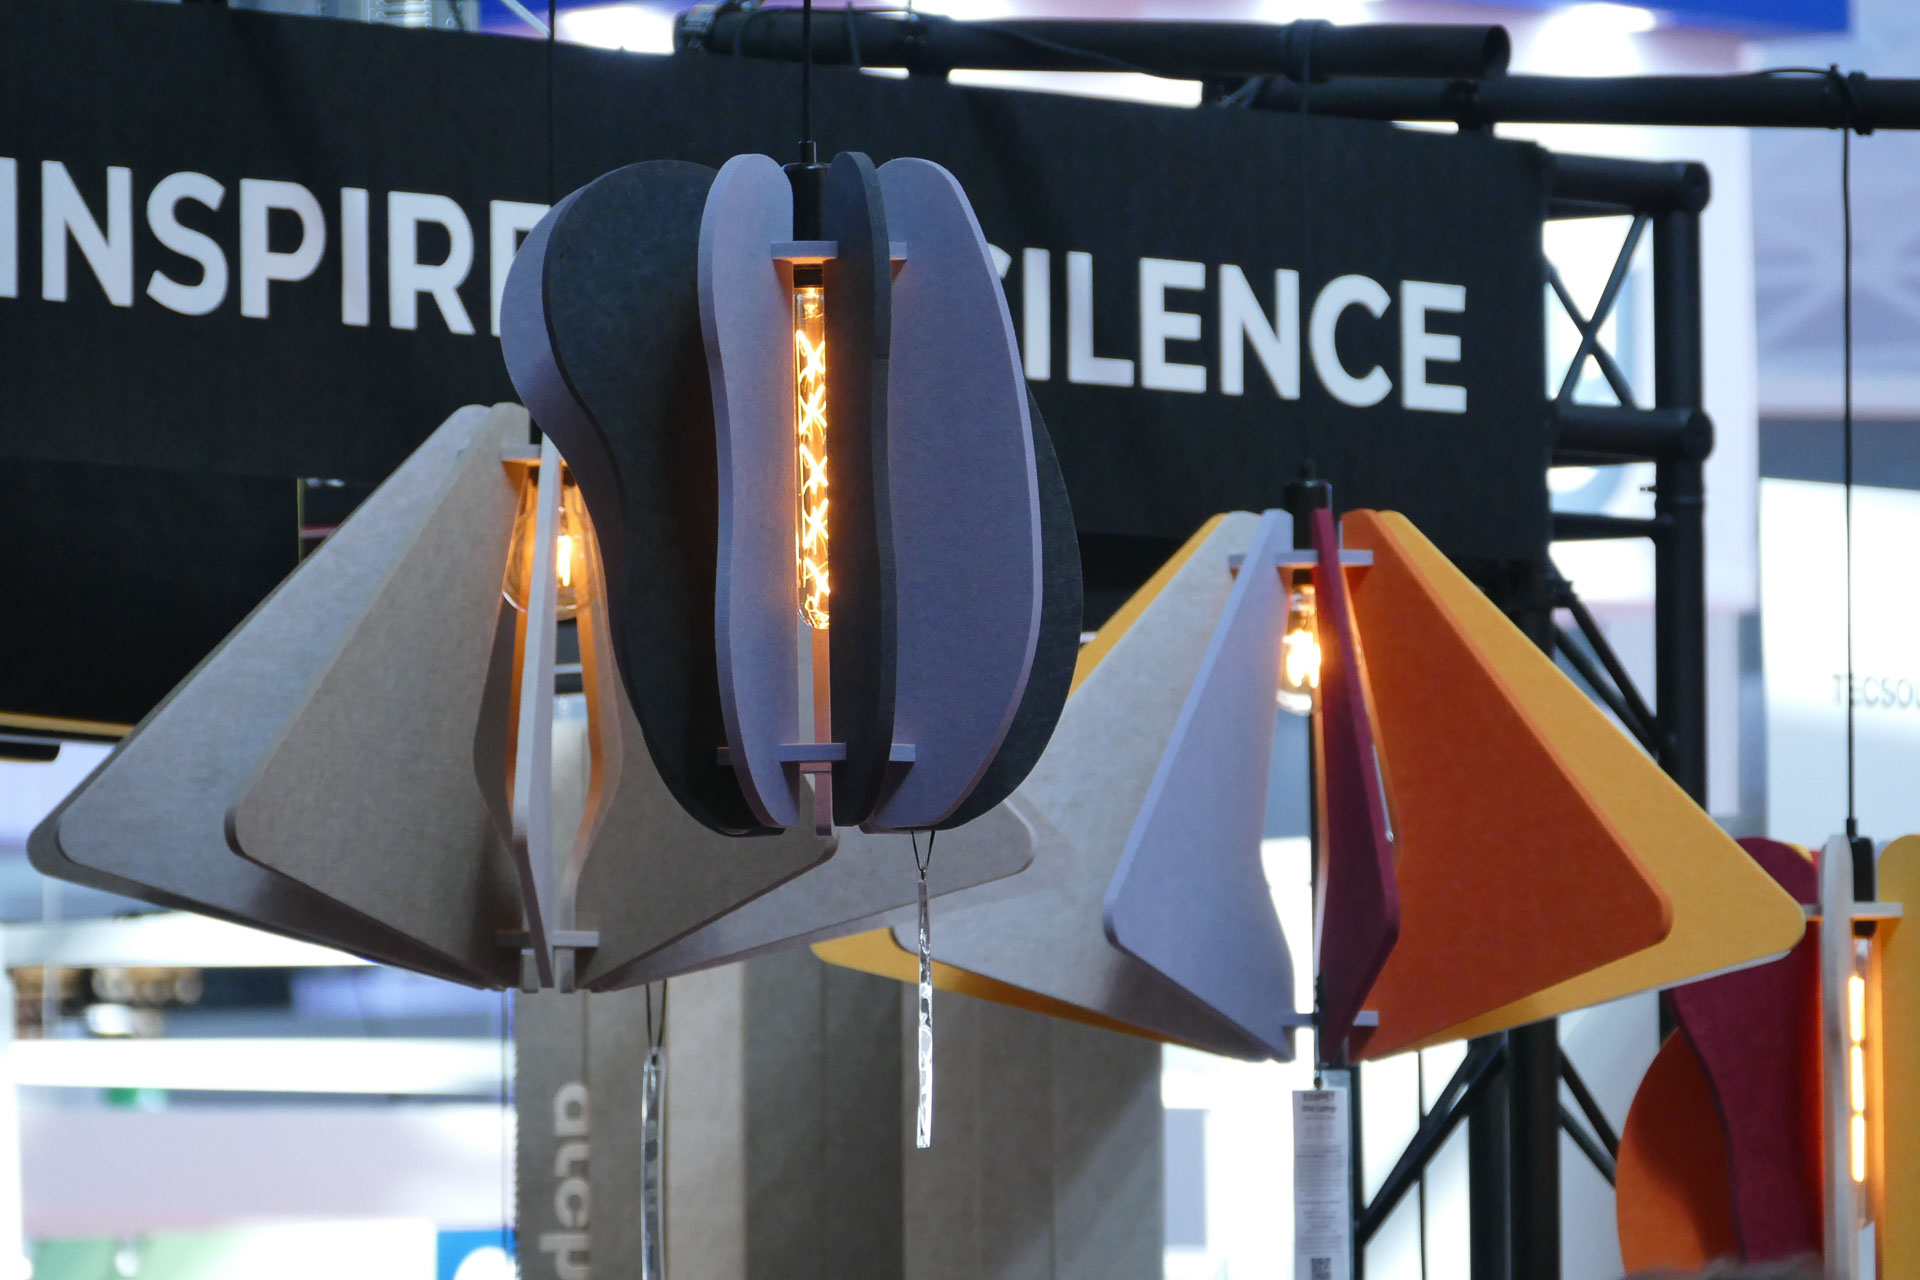 Colourful acustic sound absorbing lamp shades at Batimat 2022 trade show